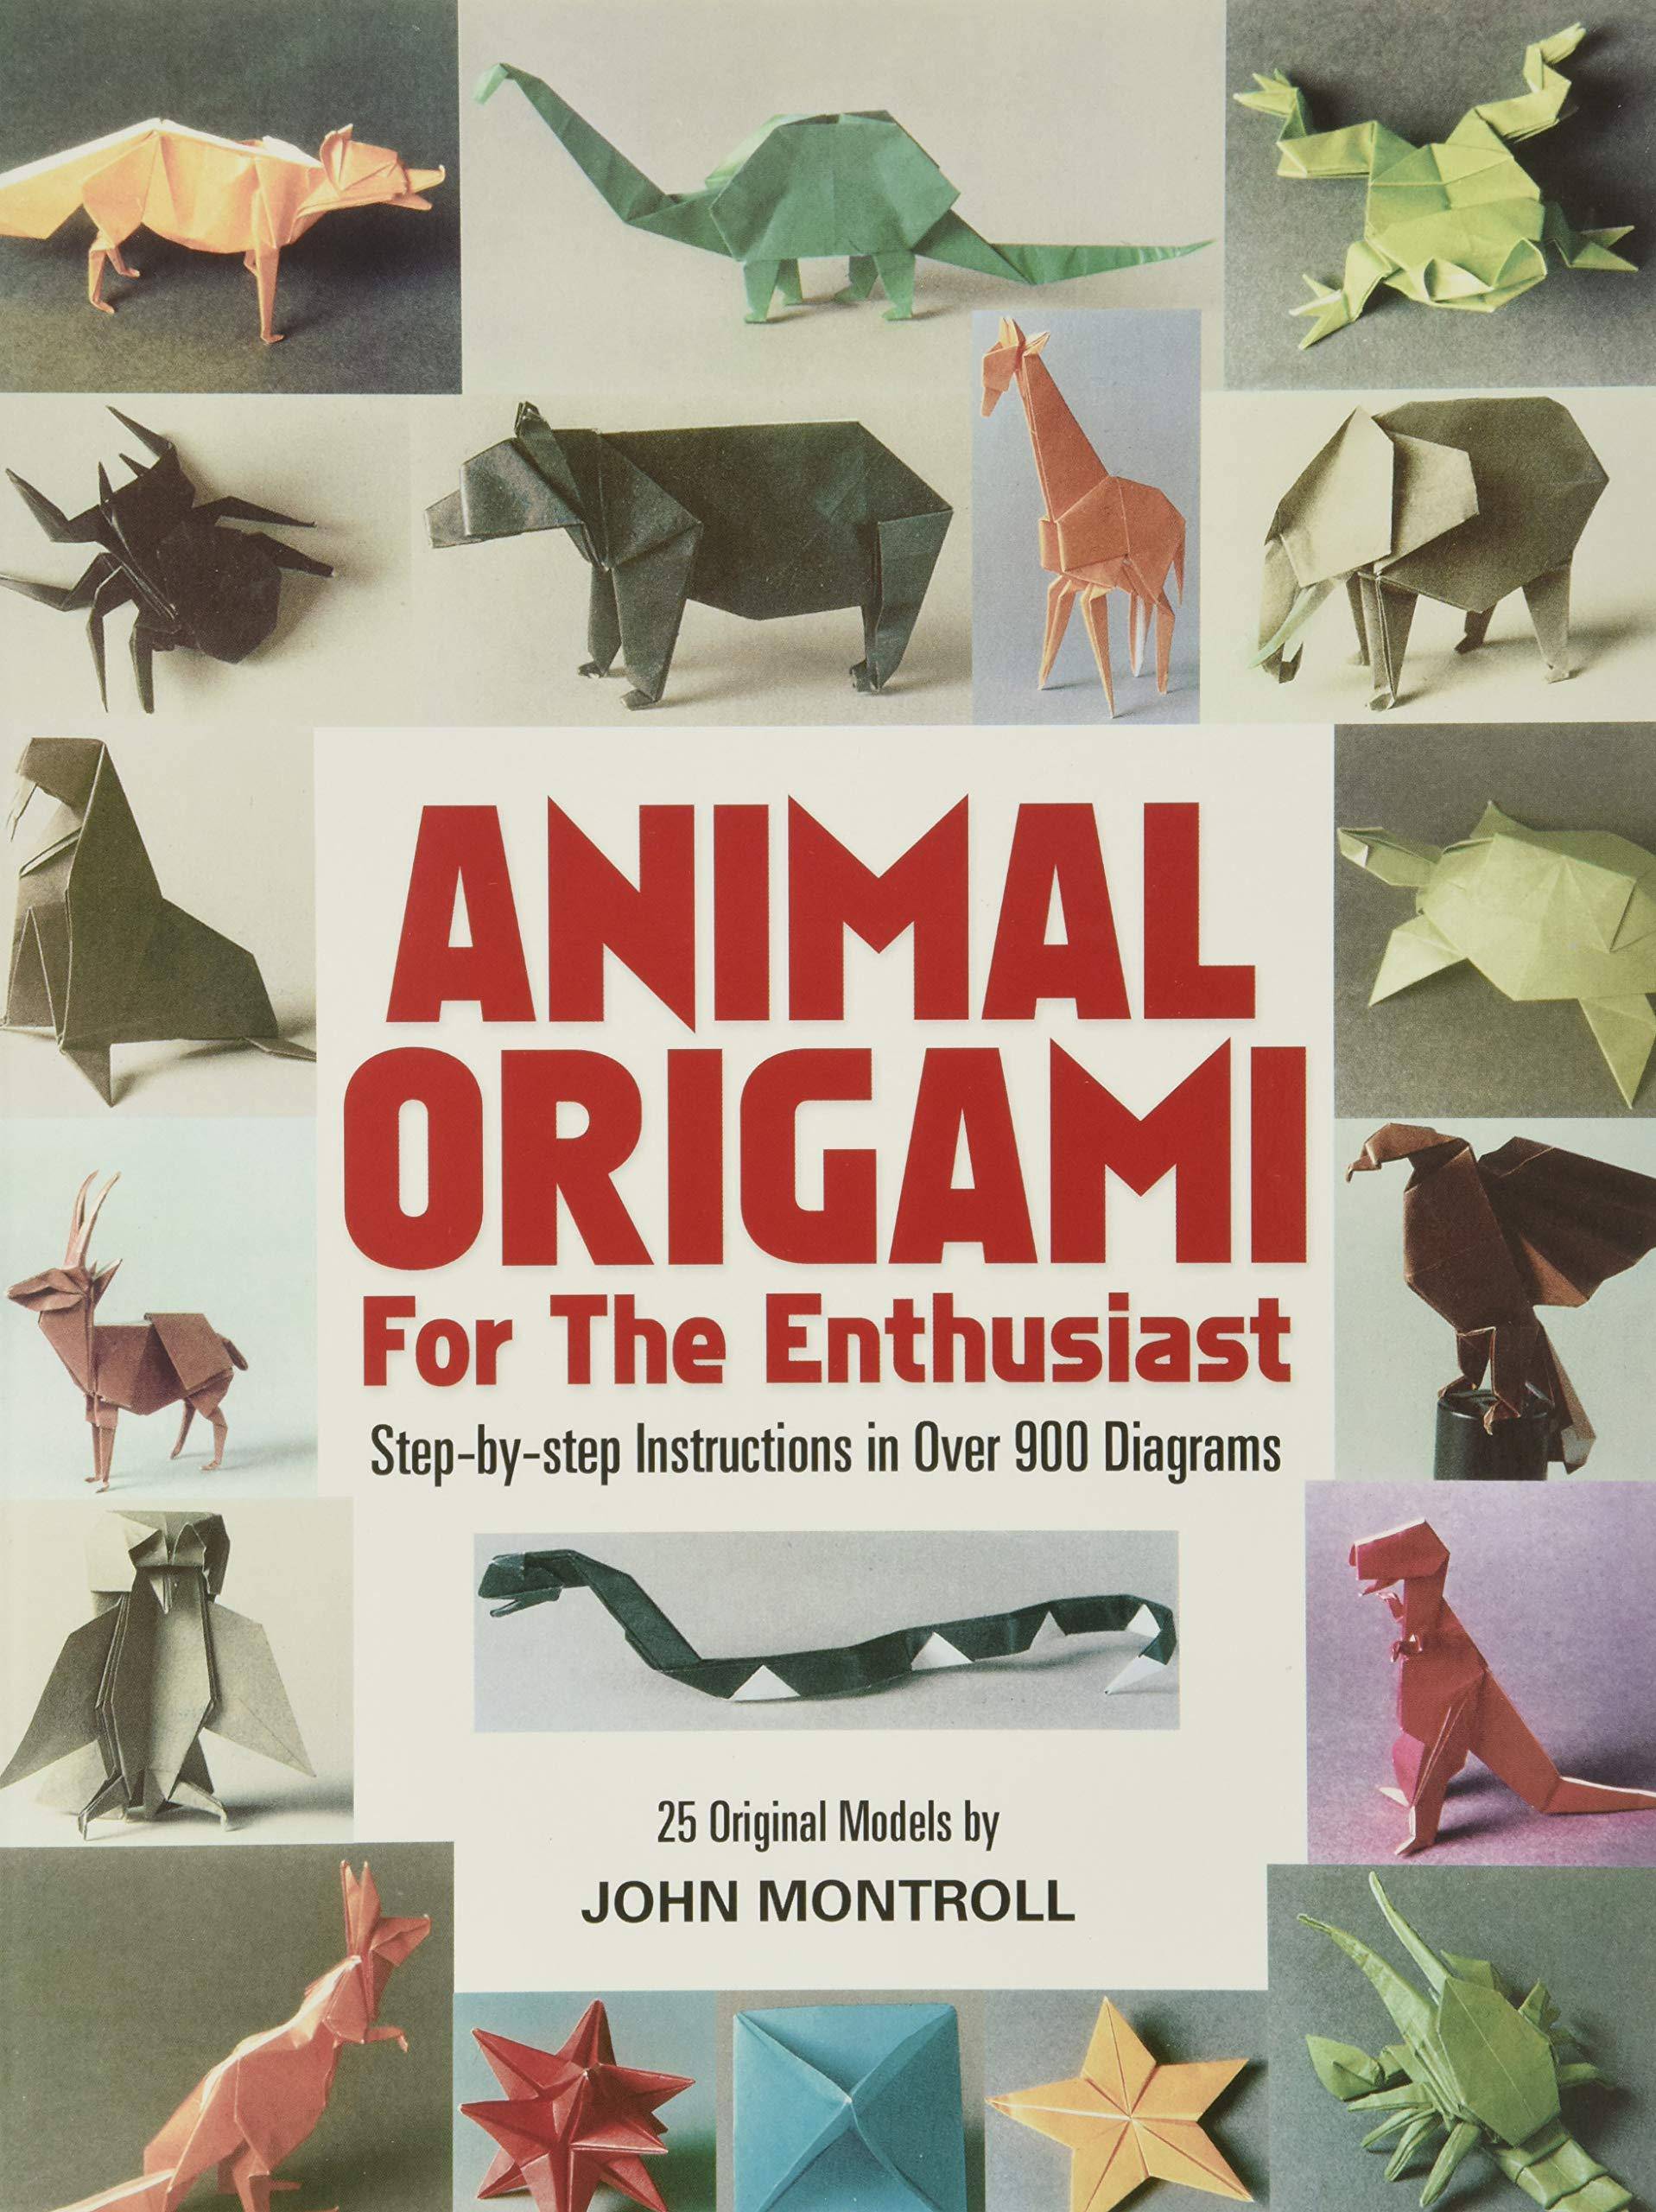 Animal Origami for the Enthusiast: Step-By-Step Instructions in - SureShot Books Publishing LLC